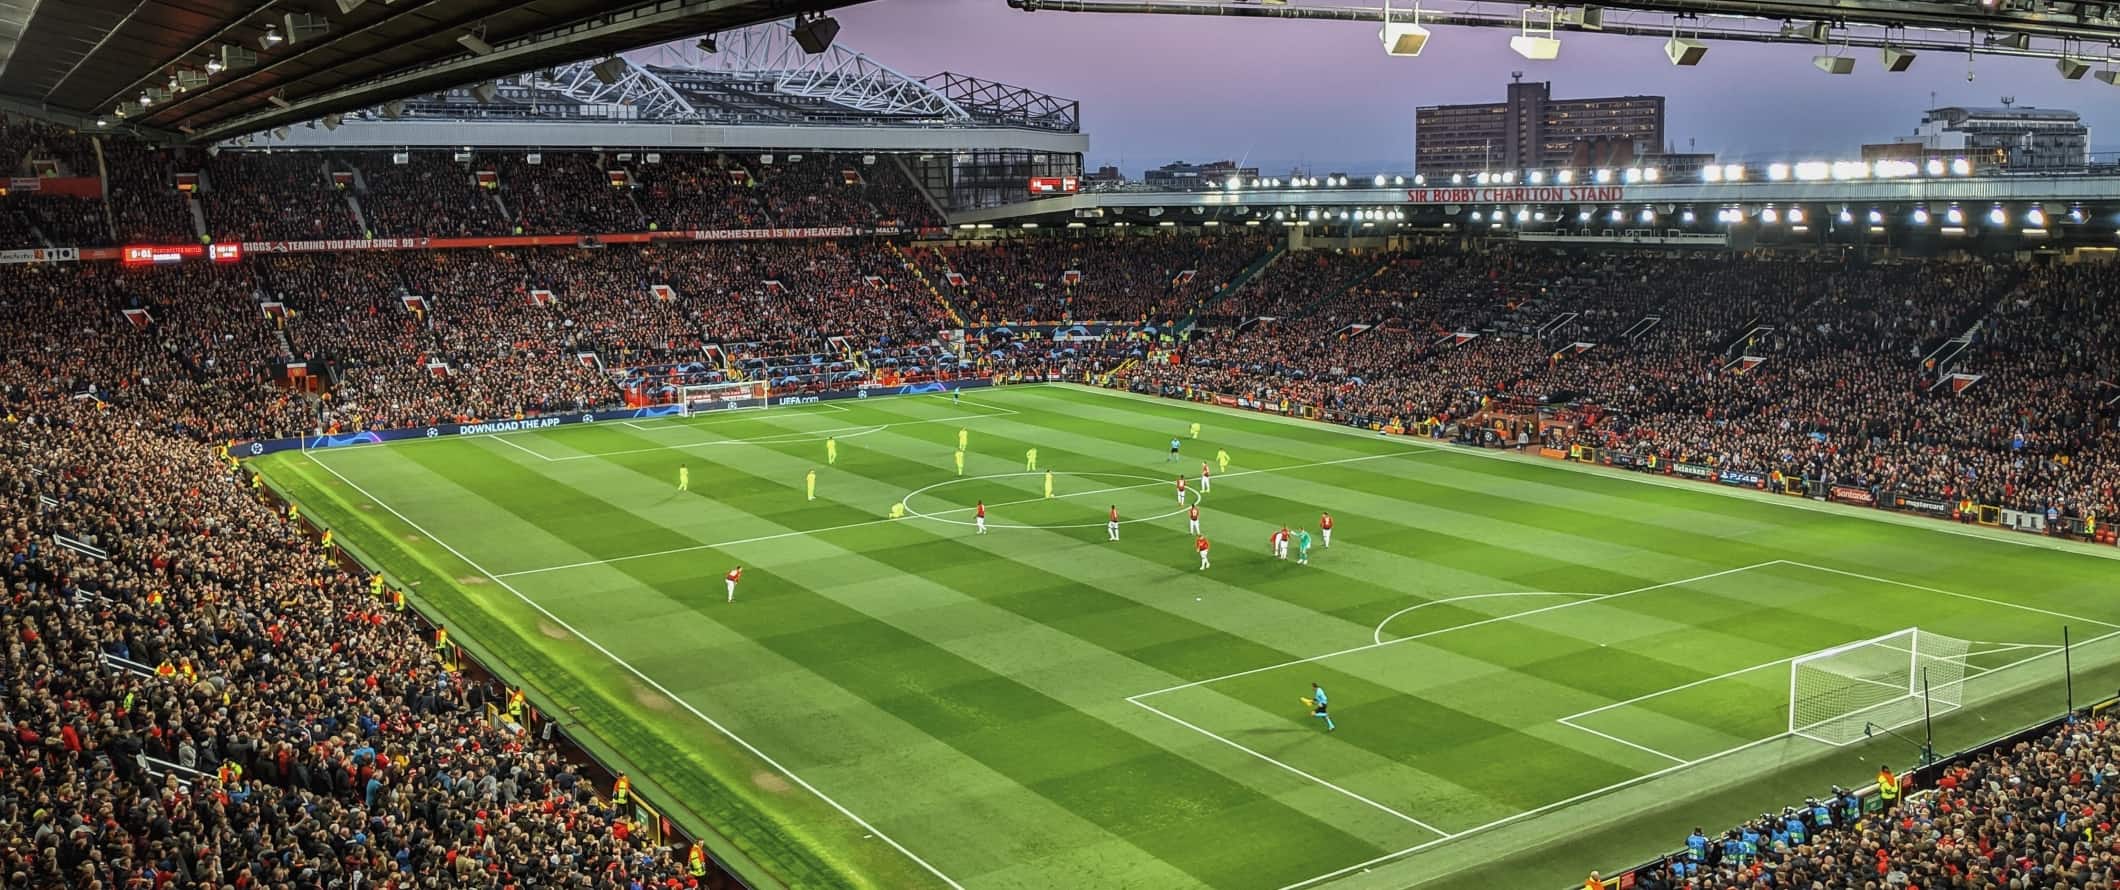 Football match being played in the Old Trafford stadium in Manchester, England